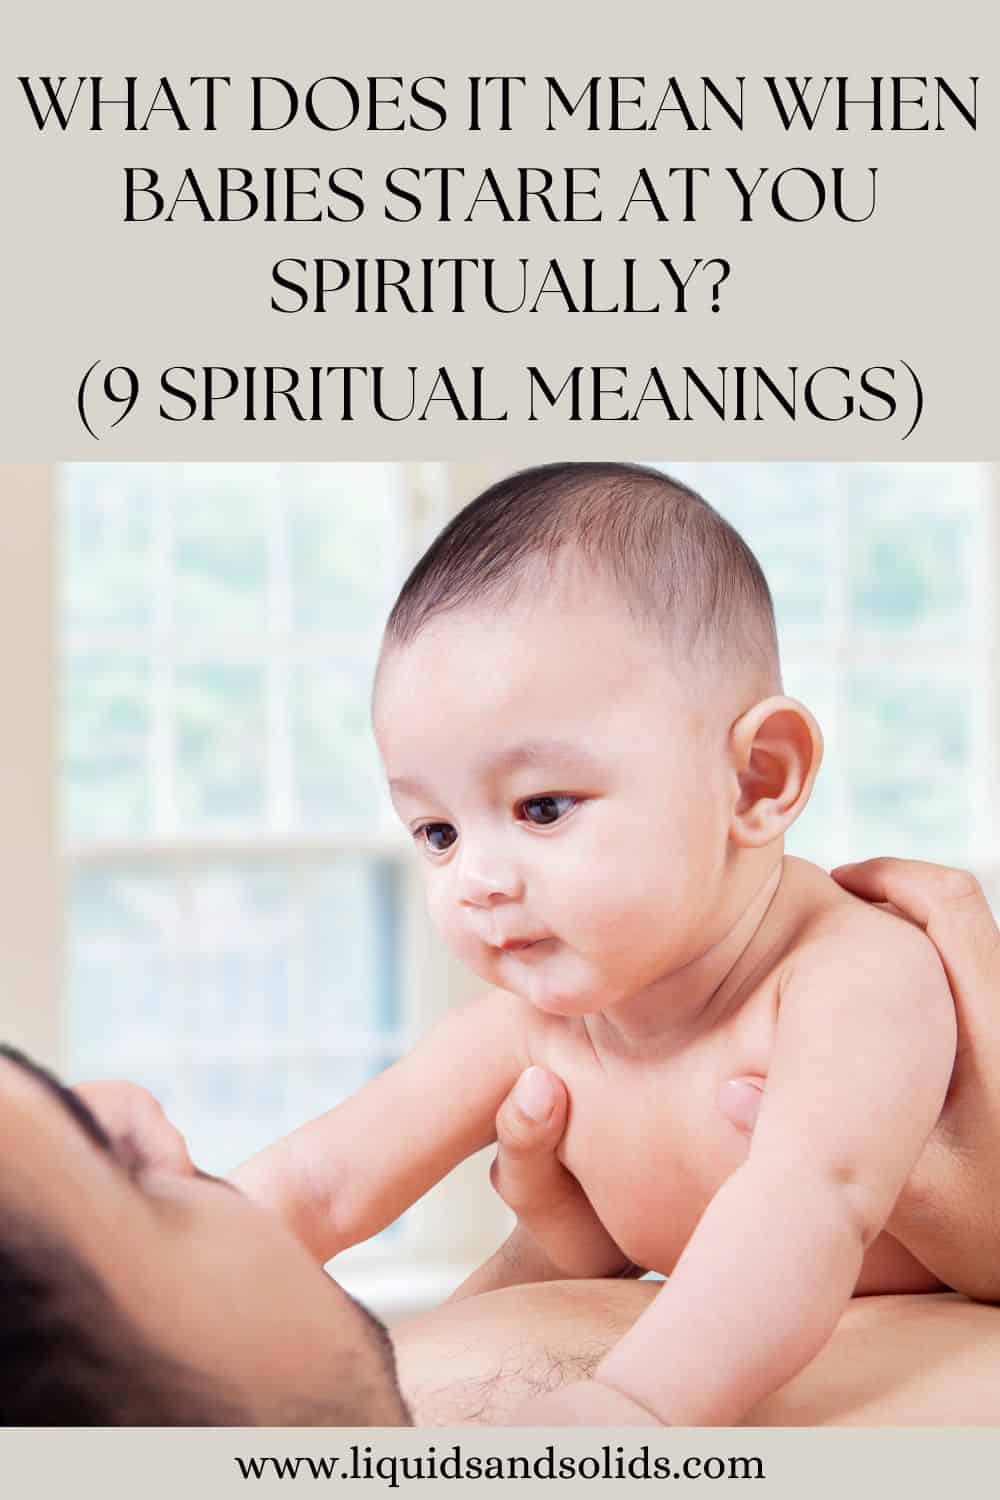 What Does It Mean When Babies Stare At You Spiritually? ( 9 Spiritual Meanings)